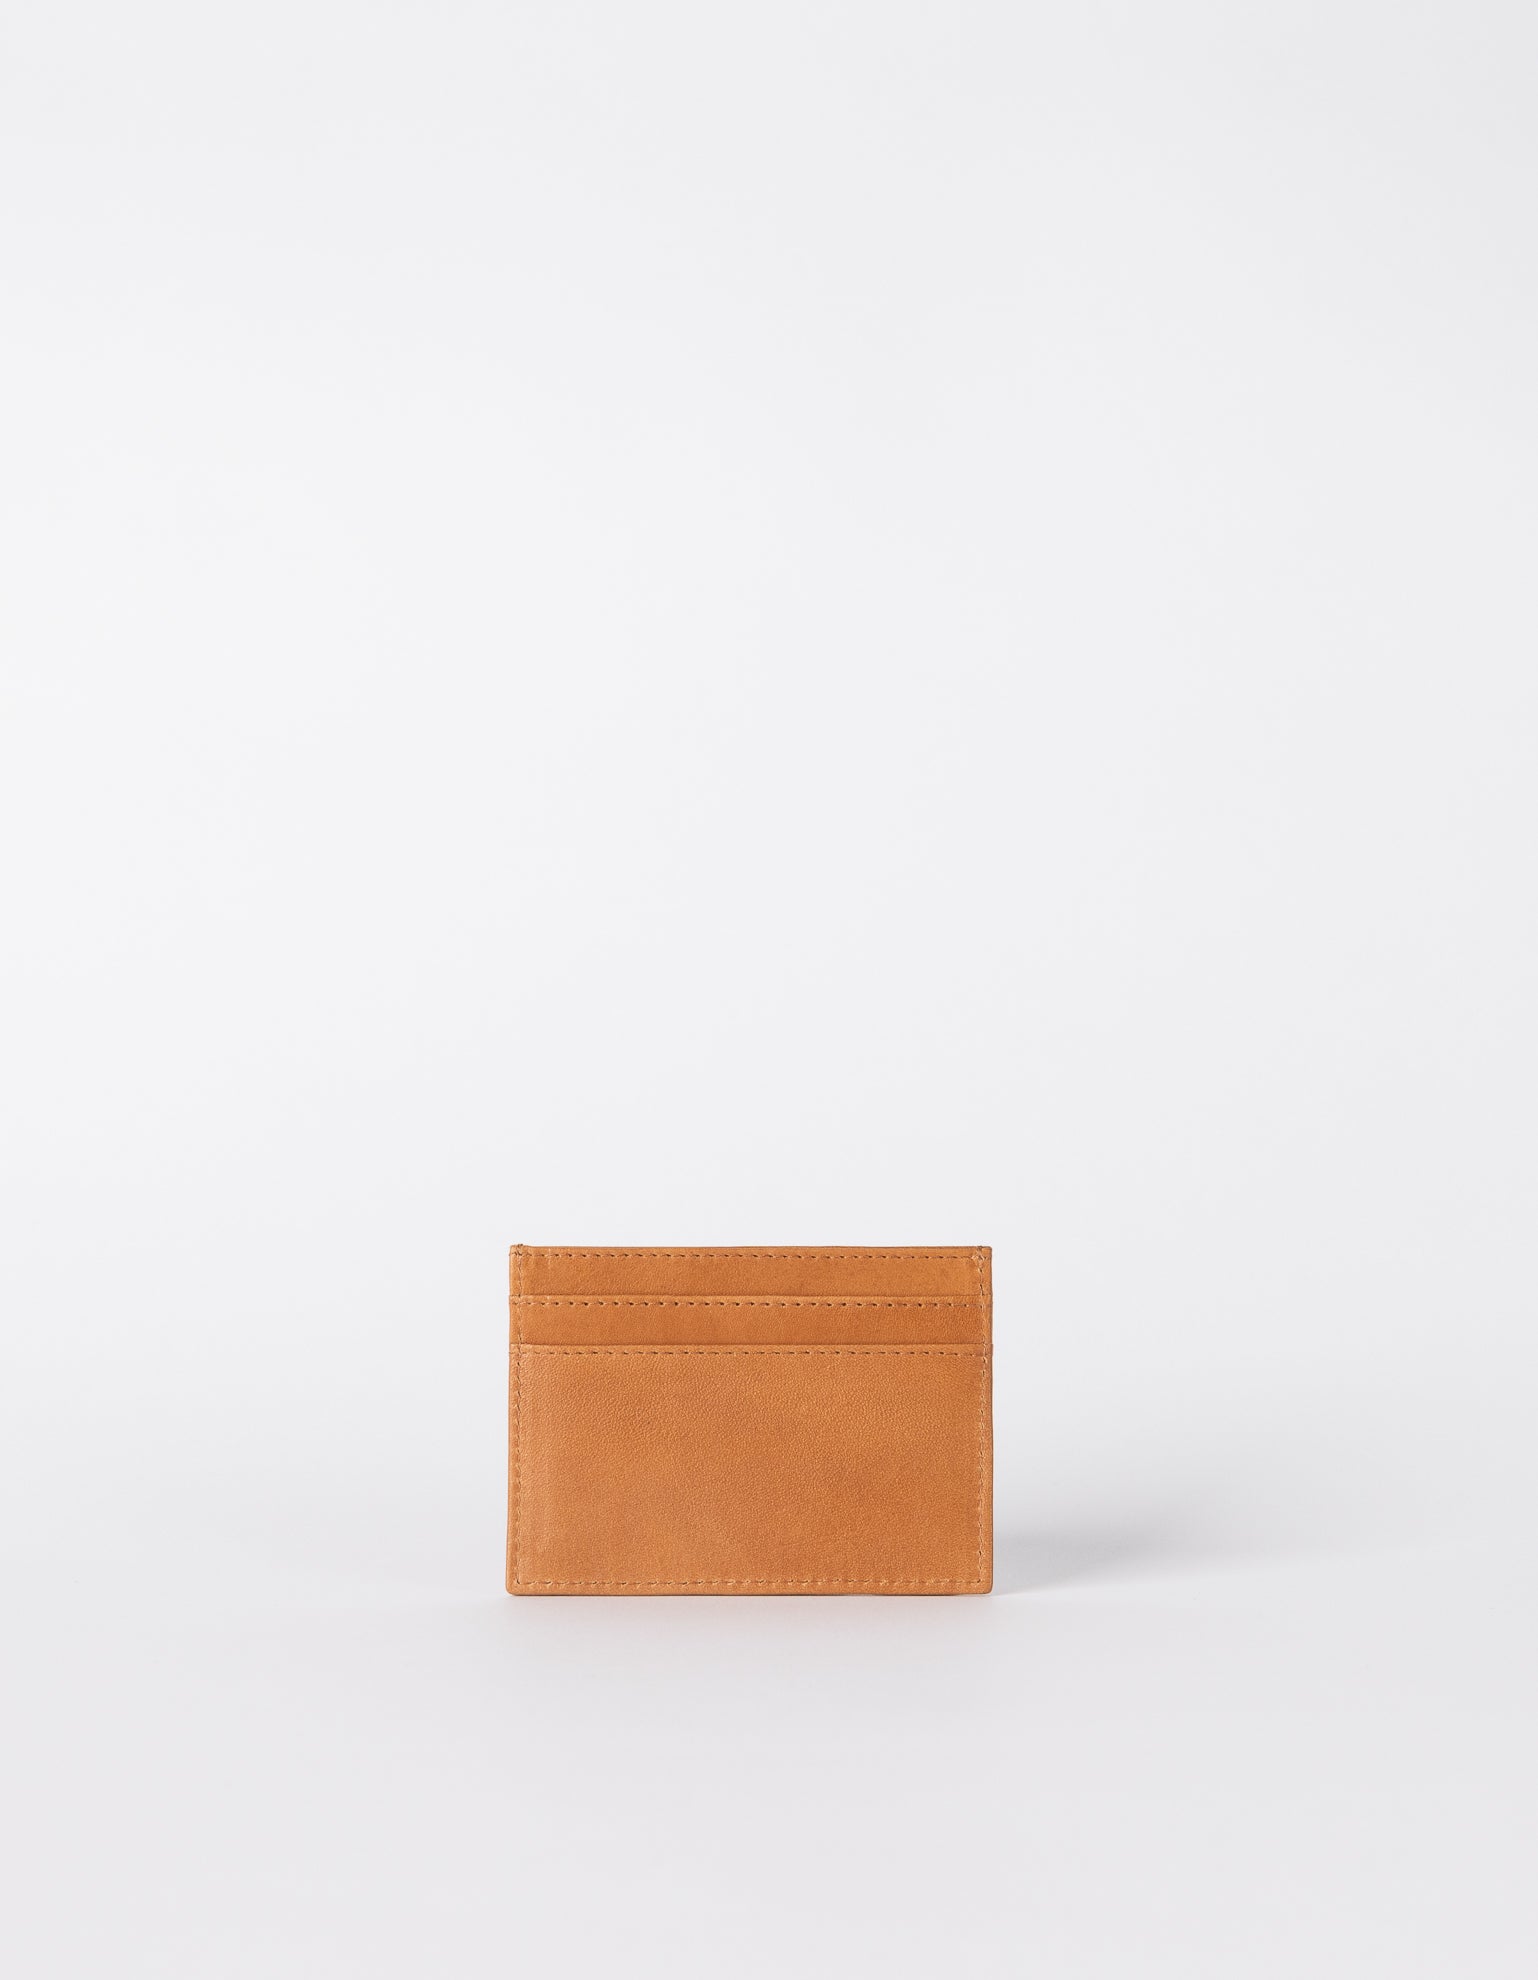 Marks Cardcase Wild Oak Soft Grain Leather. Square leather wallet, card case for bank cards. Back product image.